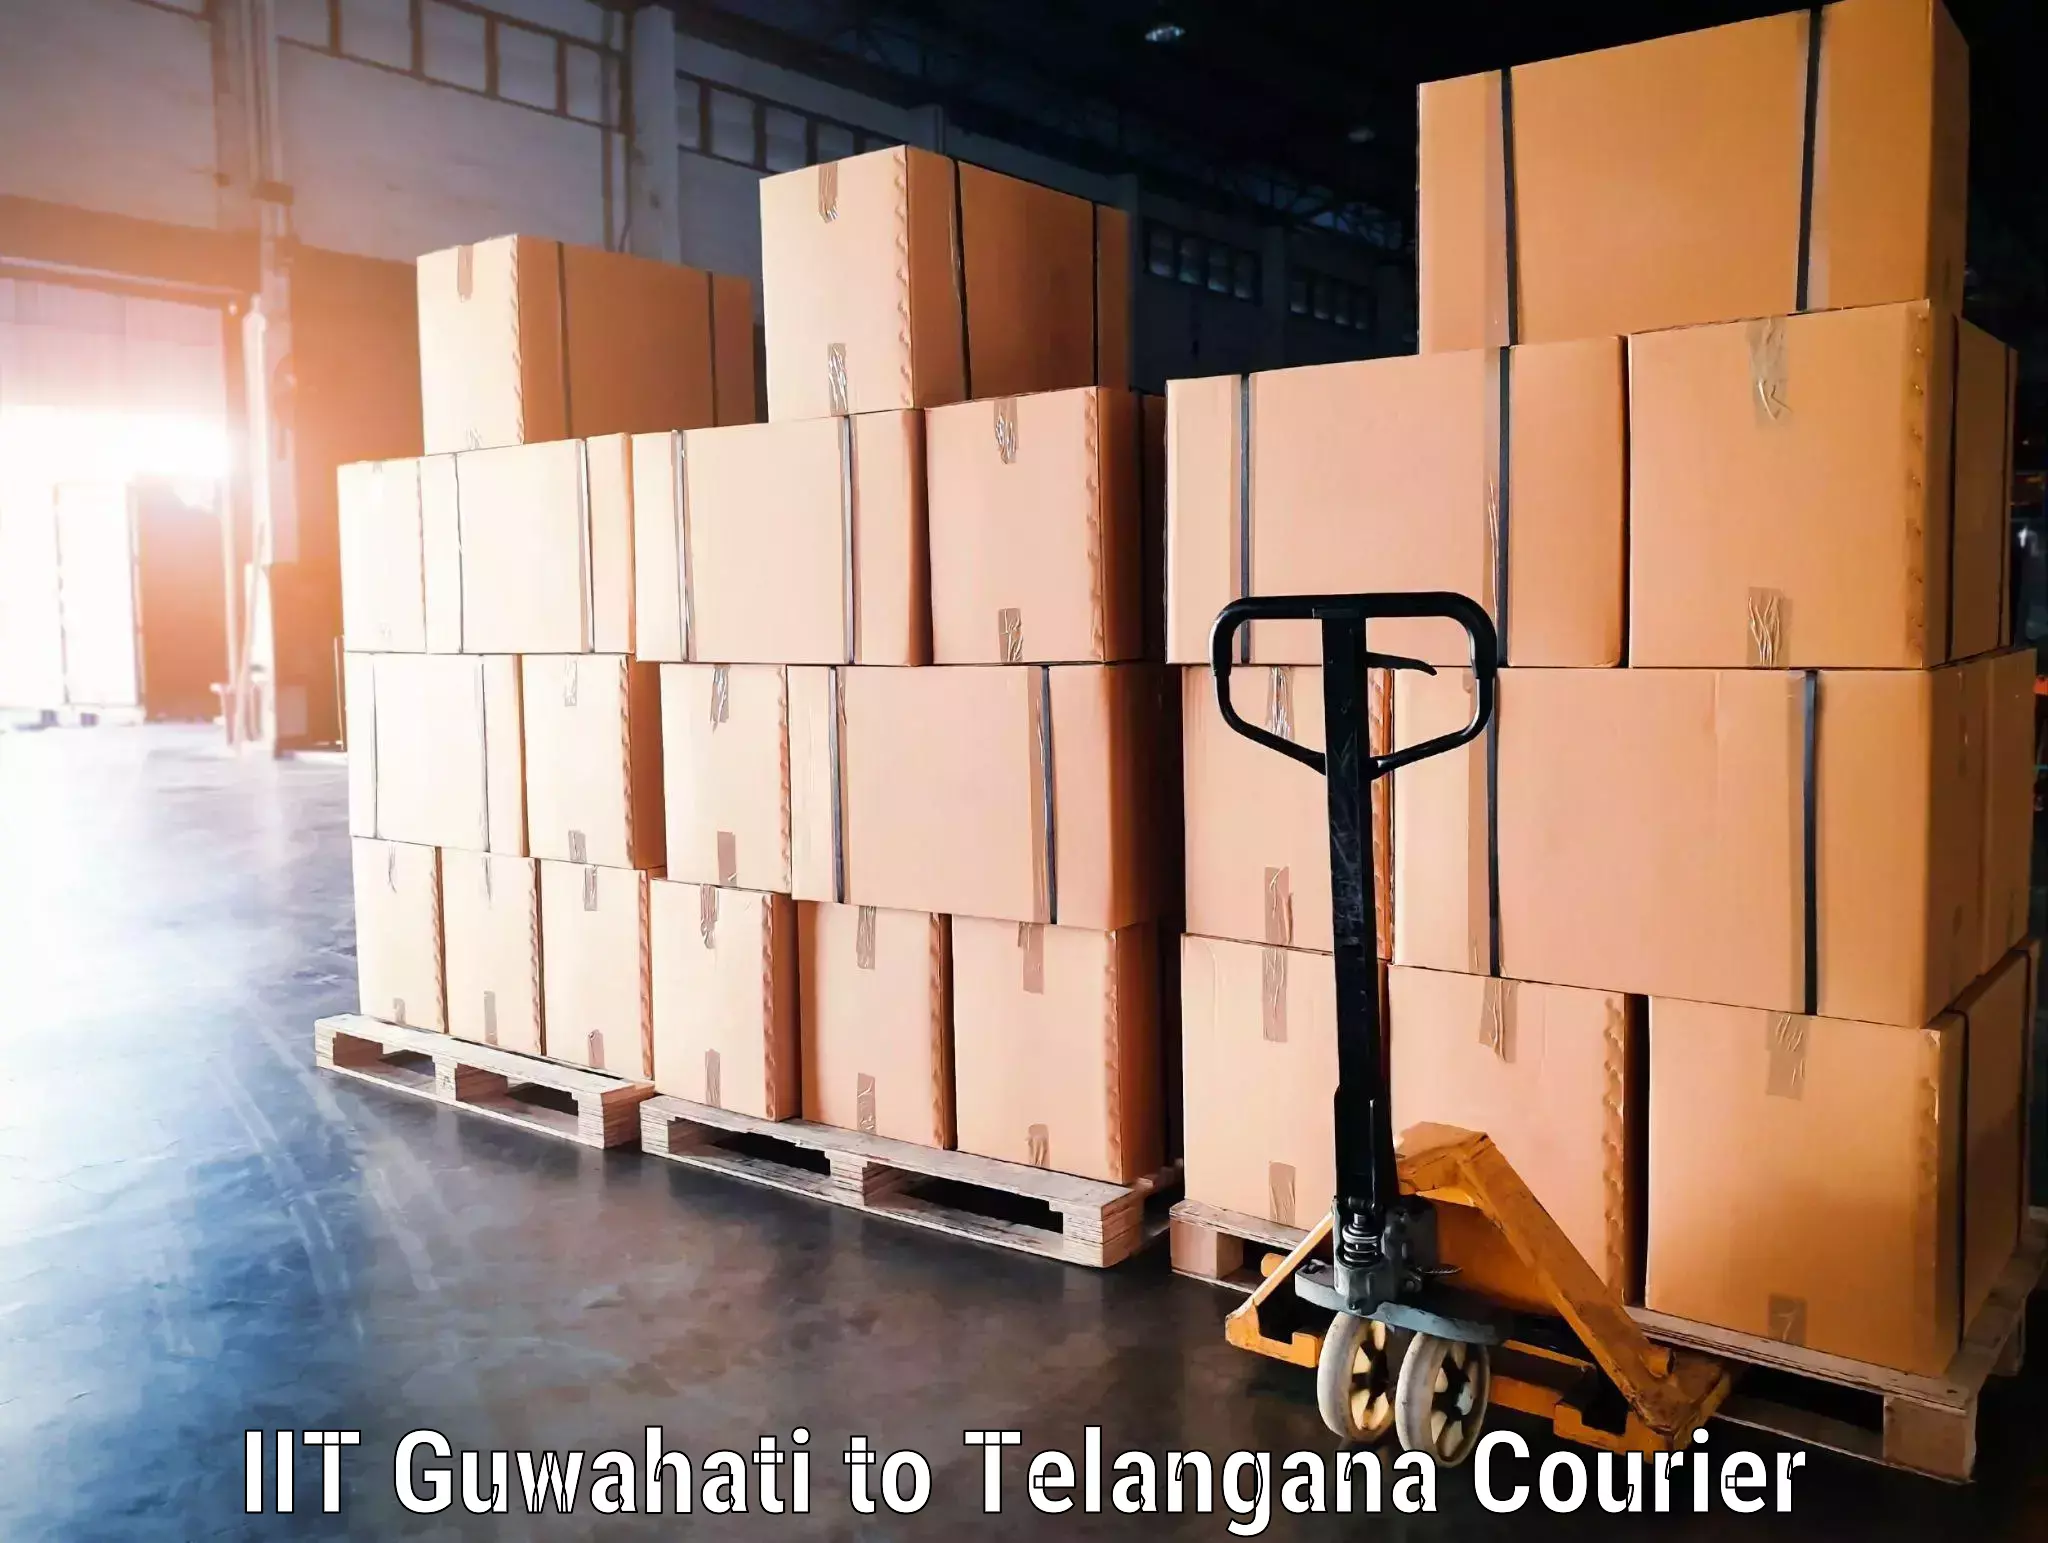 Luggage delivery system IIT Guwahati to Trimulgherry